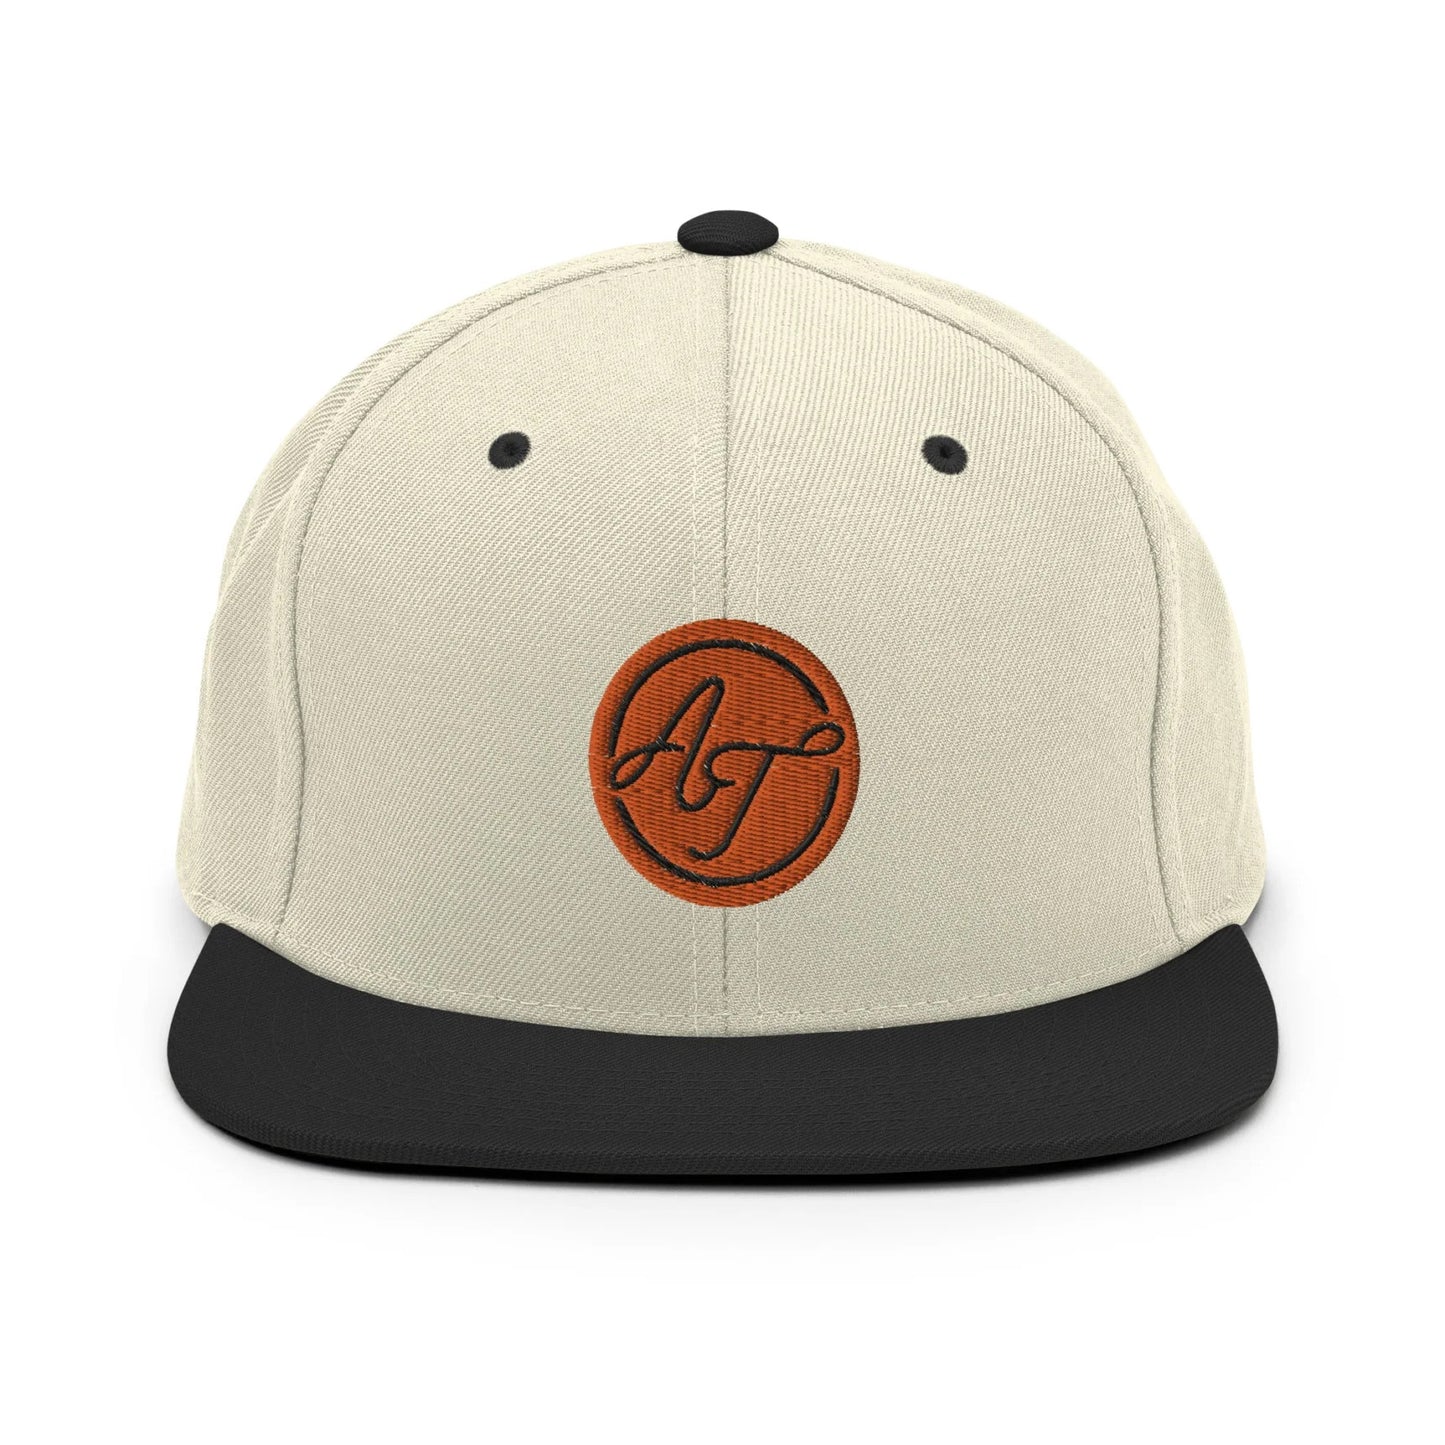 Thuuuuney ShowZone snapback hat in natural white with black brim and accents